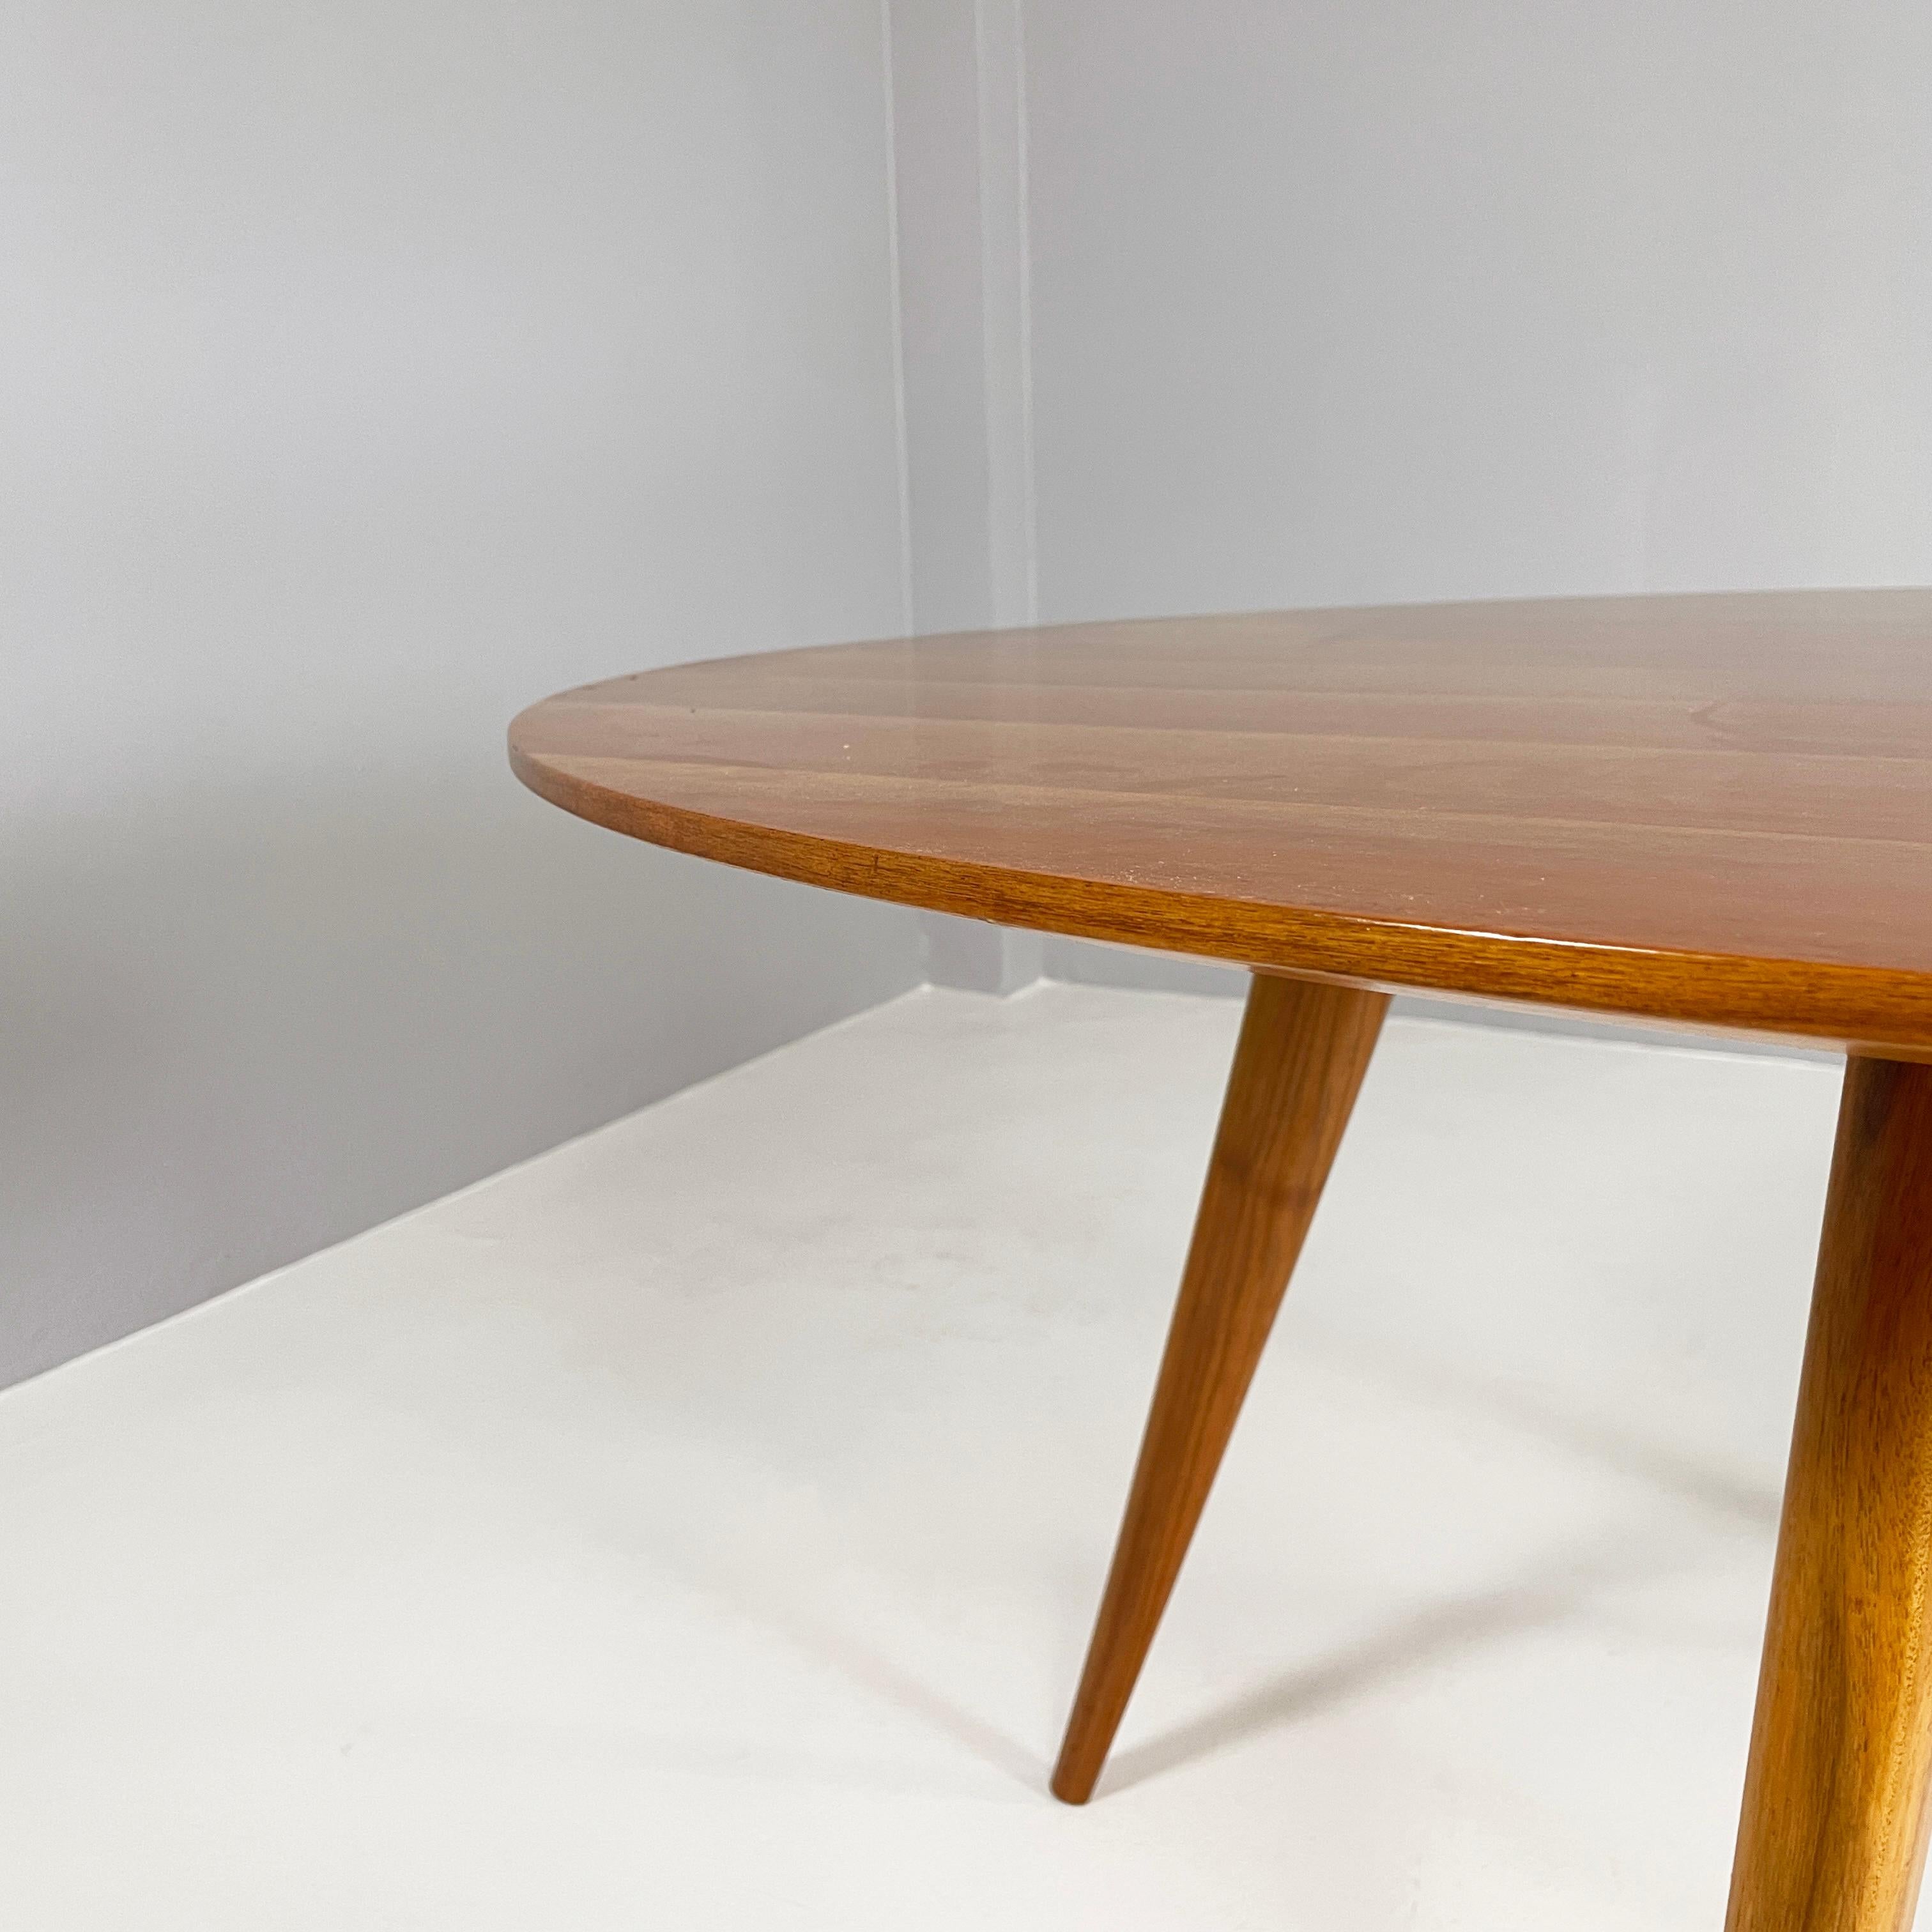 Italian mid-century modern Wooden dining table with extension, 1960s For Sale 3